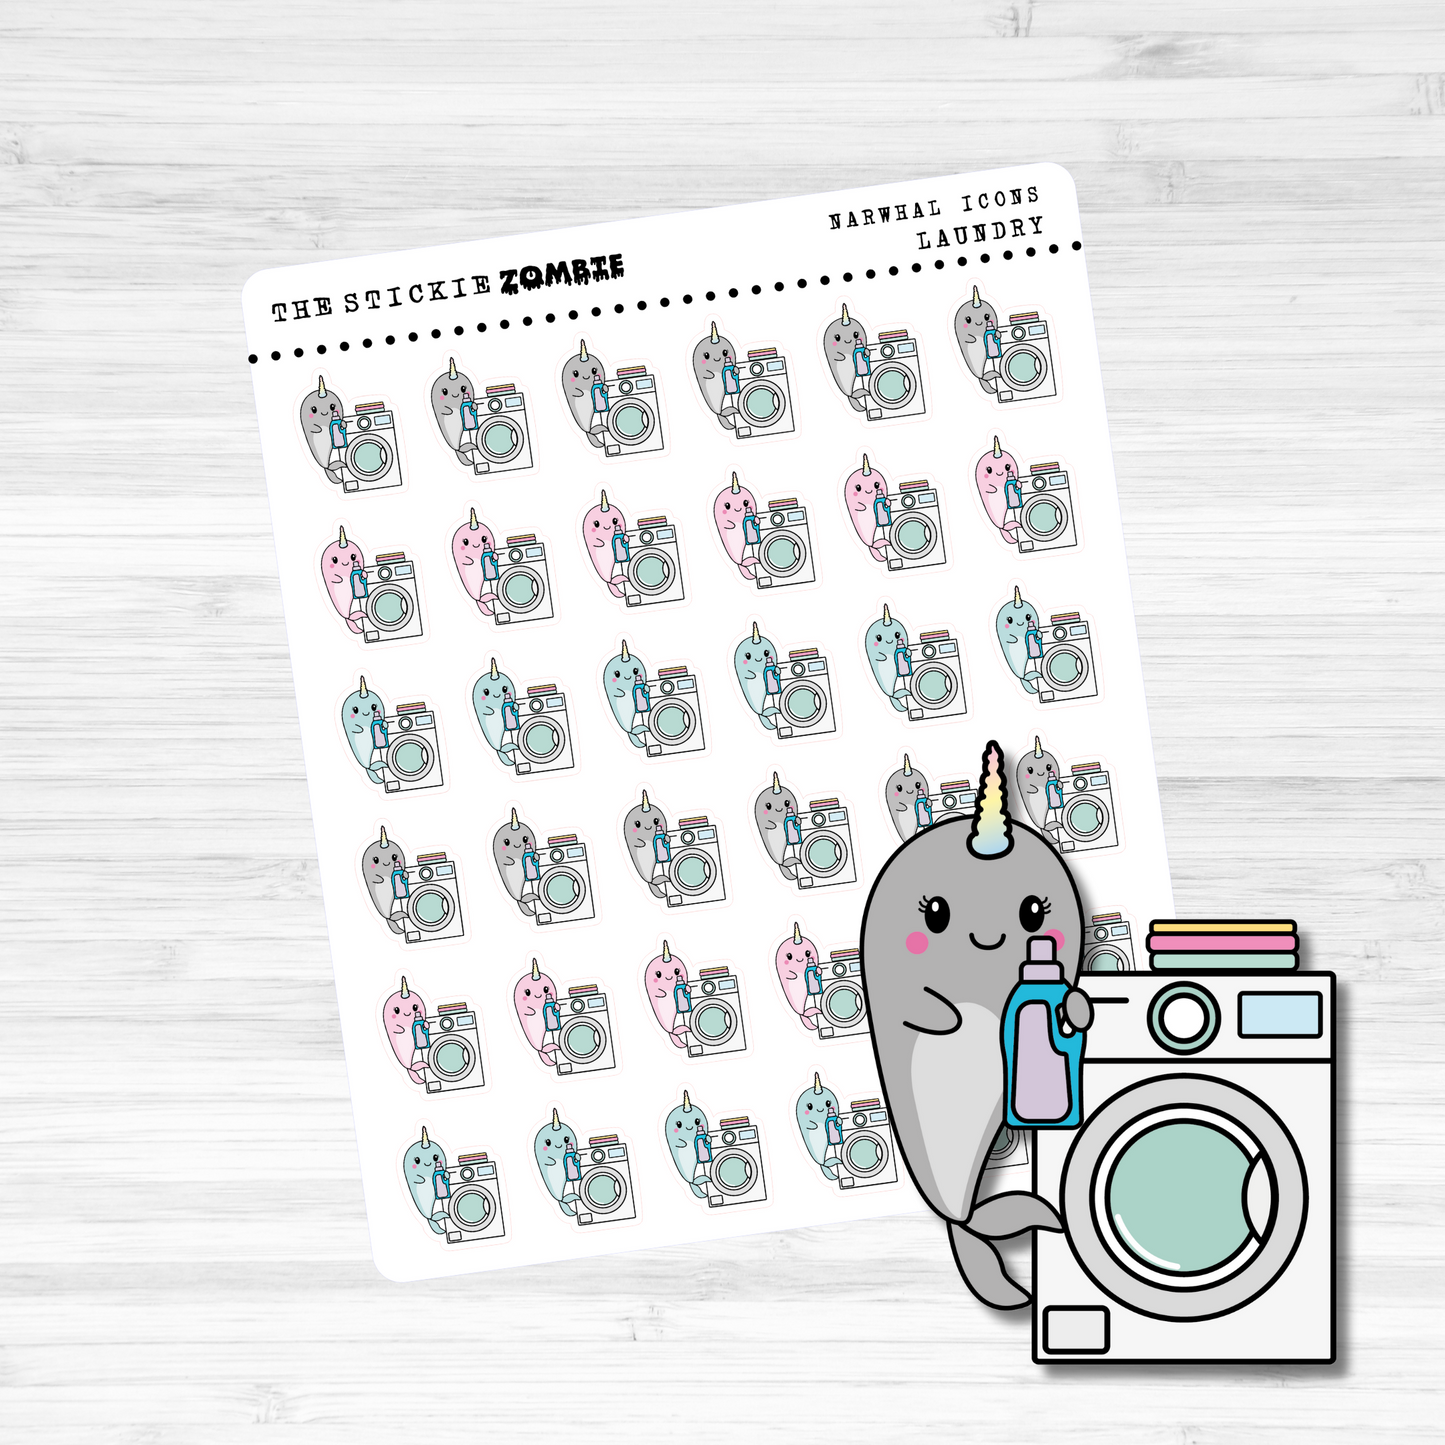 Icons / Narwhal / Laundry